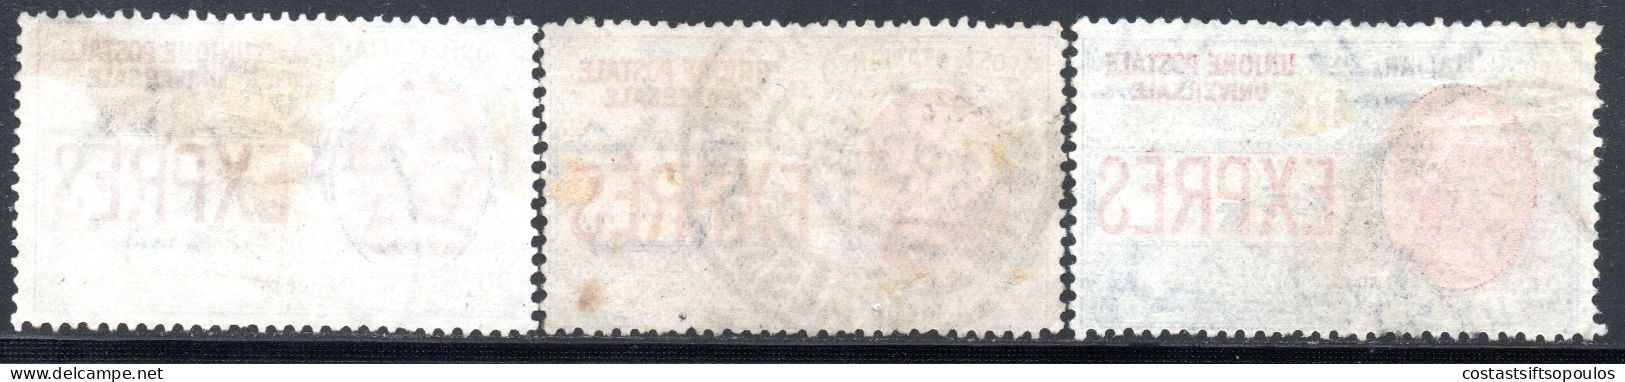 2149. ITALY 1908-1926 SPECIAL DELIVERY SC. E6-E8 - Express Mail